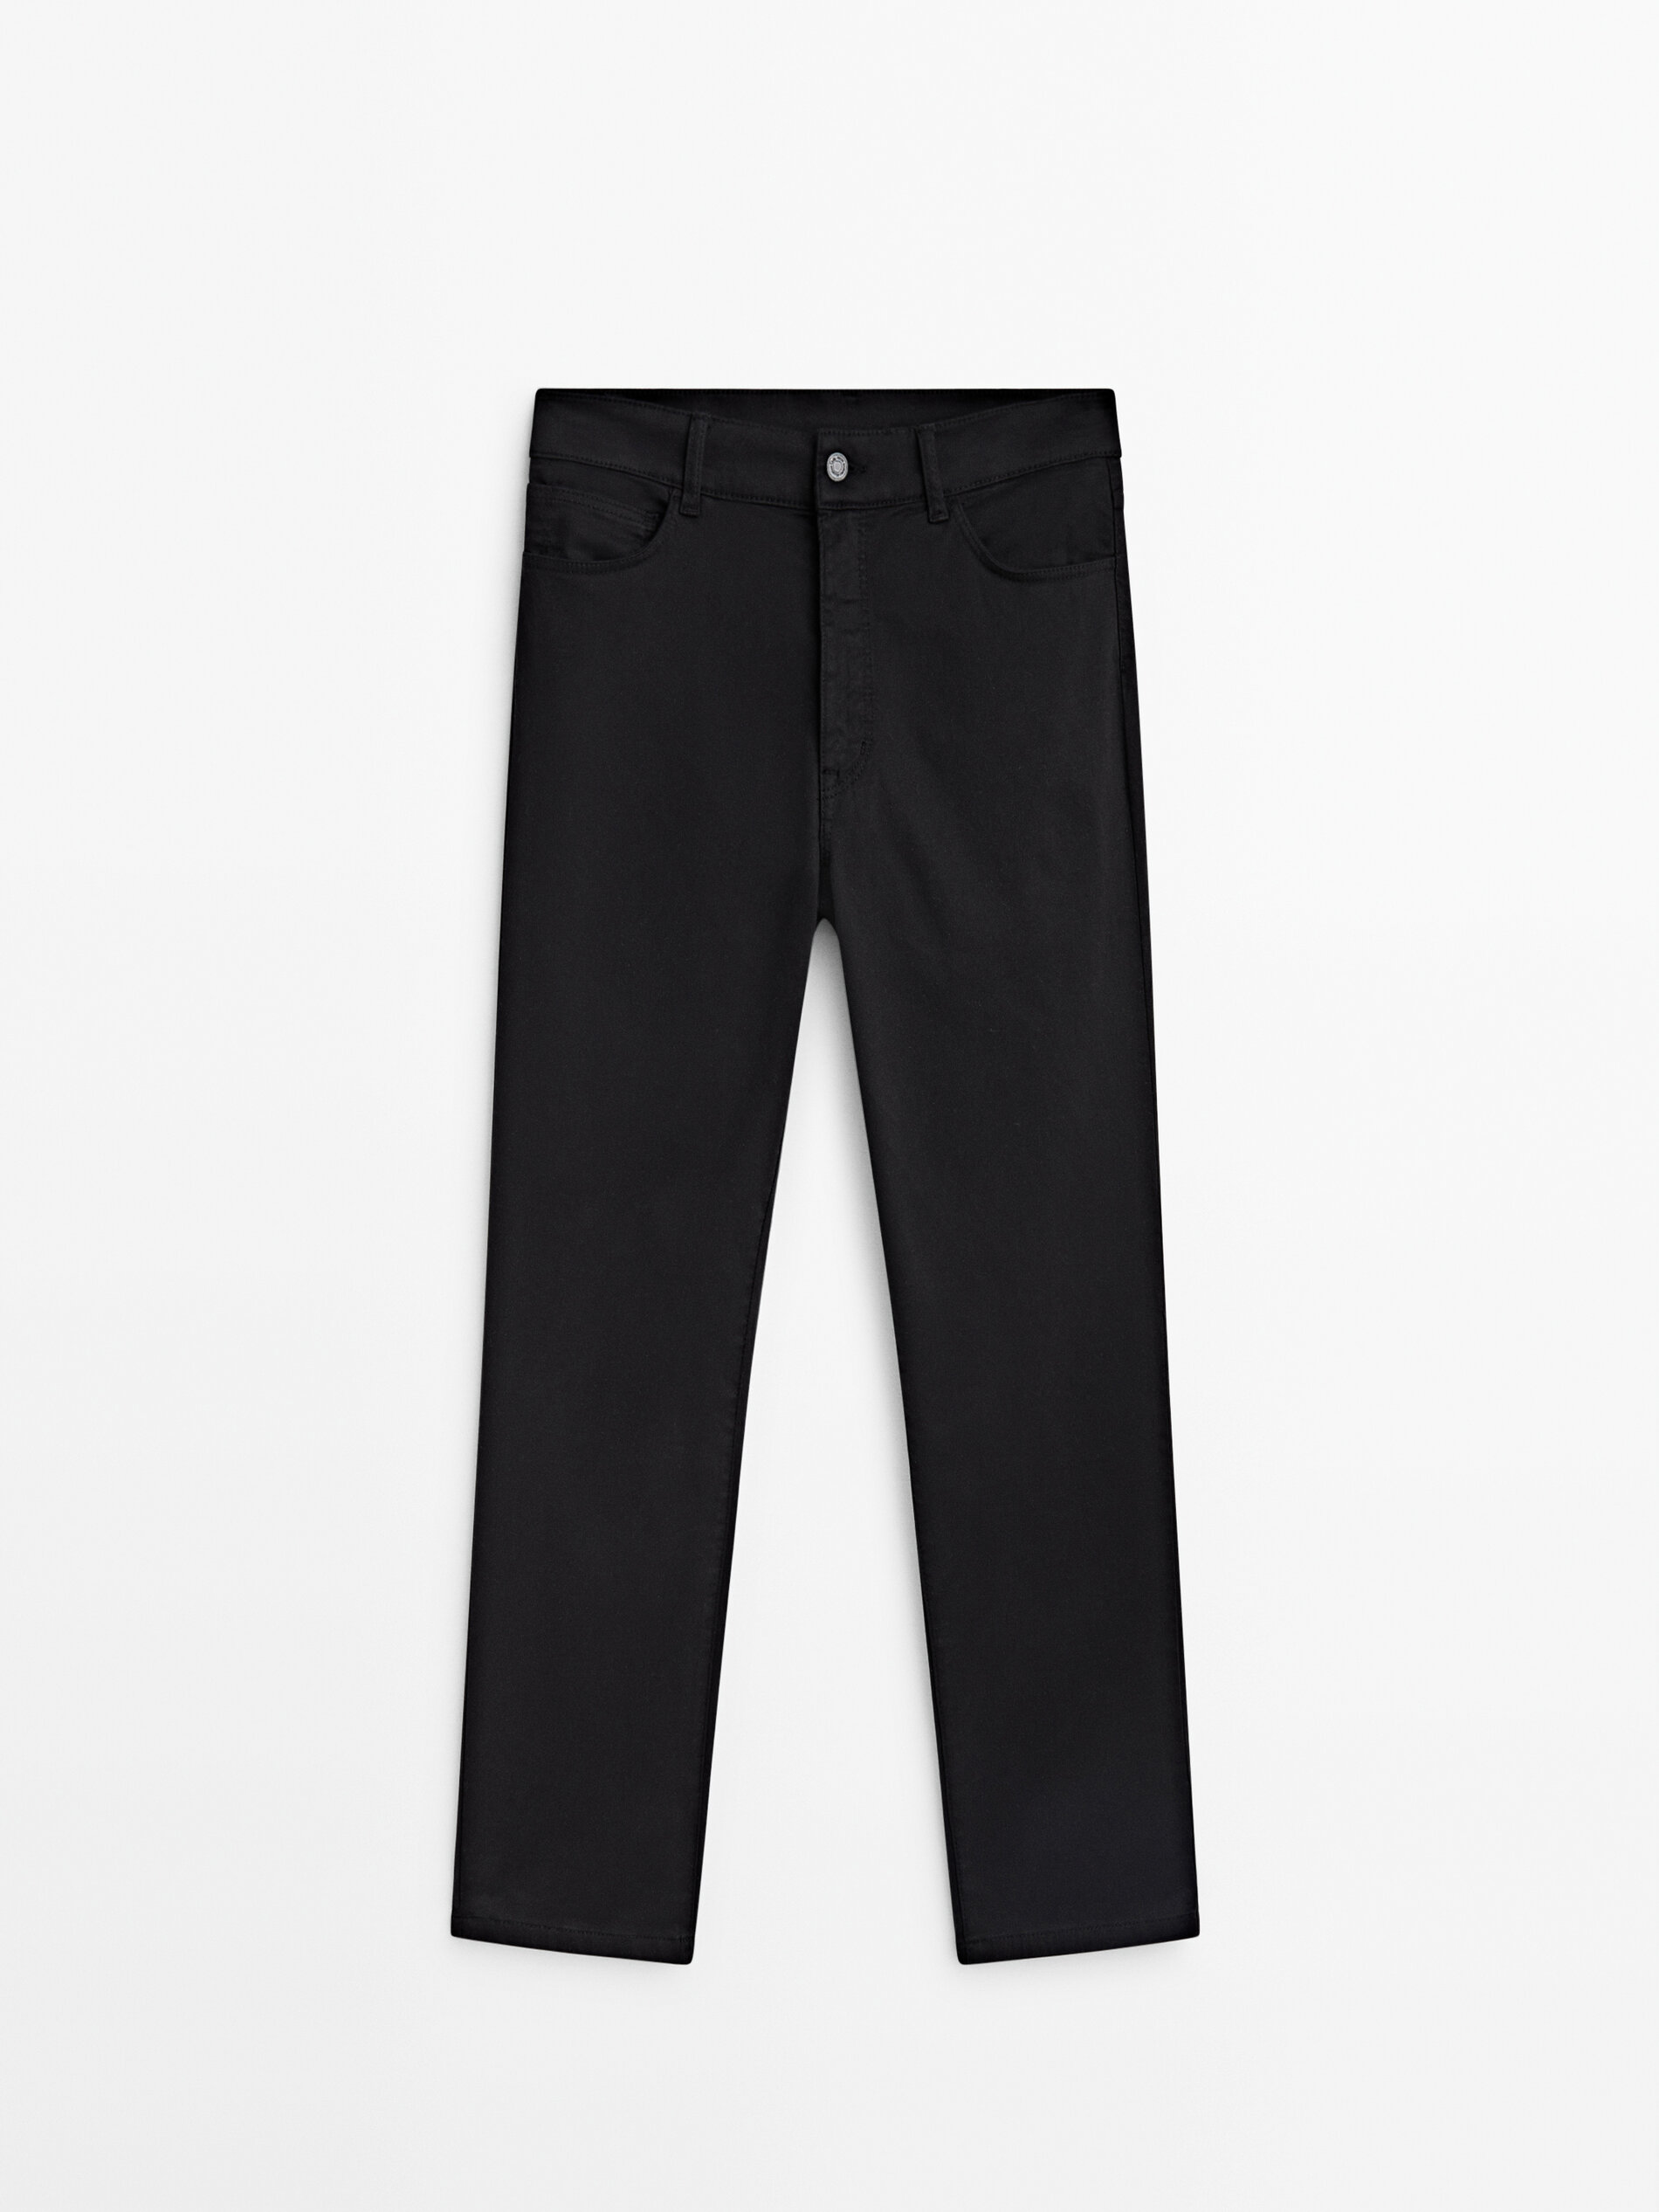 Code by Lifestyle Black Regular Fit Cropped Pants